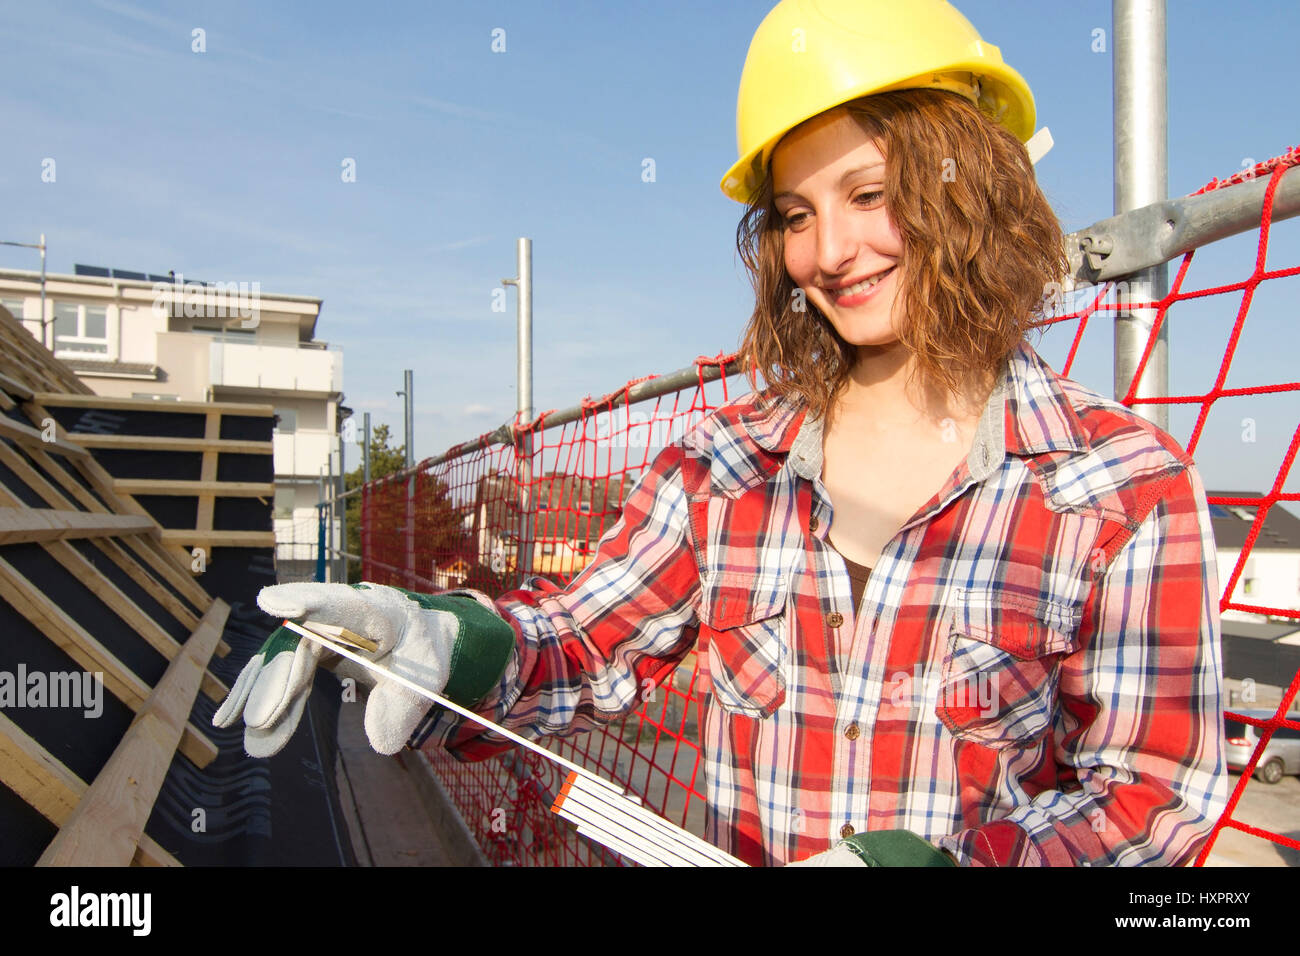 Woman as a construction worker, Frau als Bauarbeiterin Stock Photo